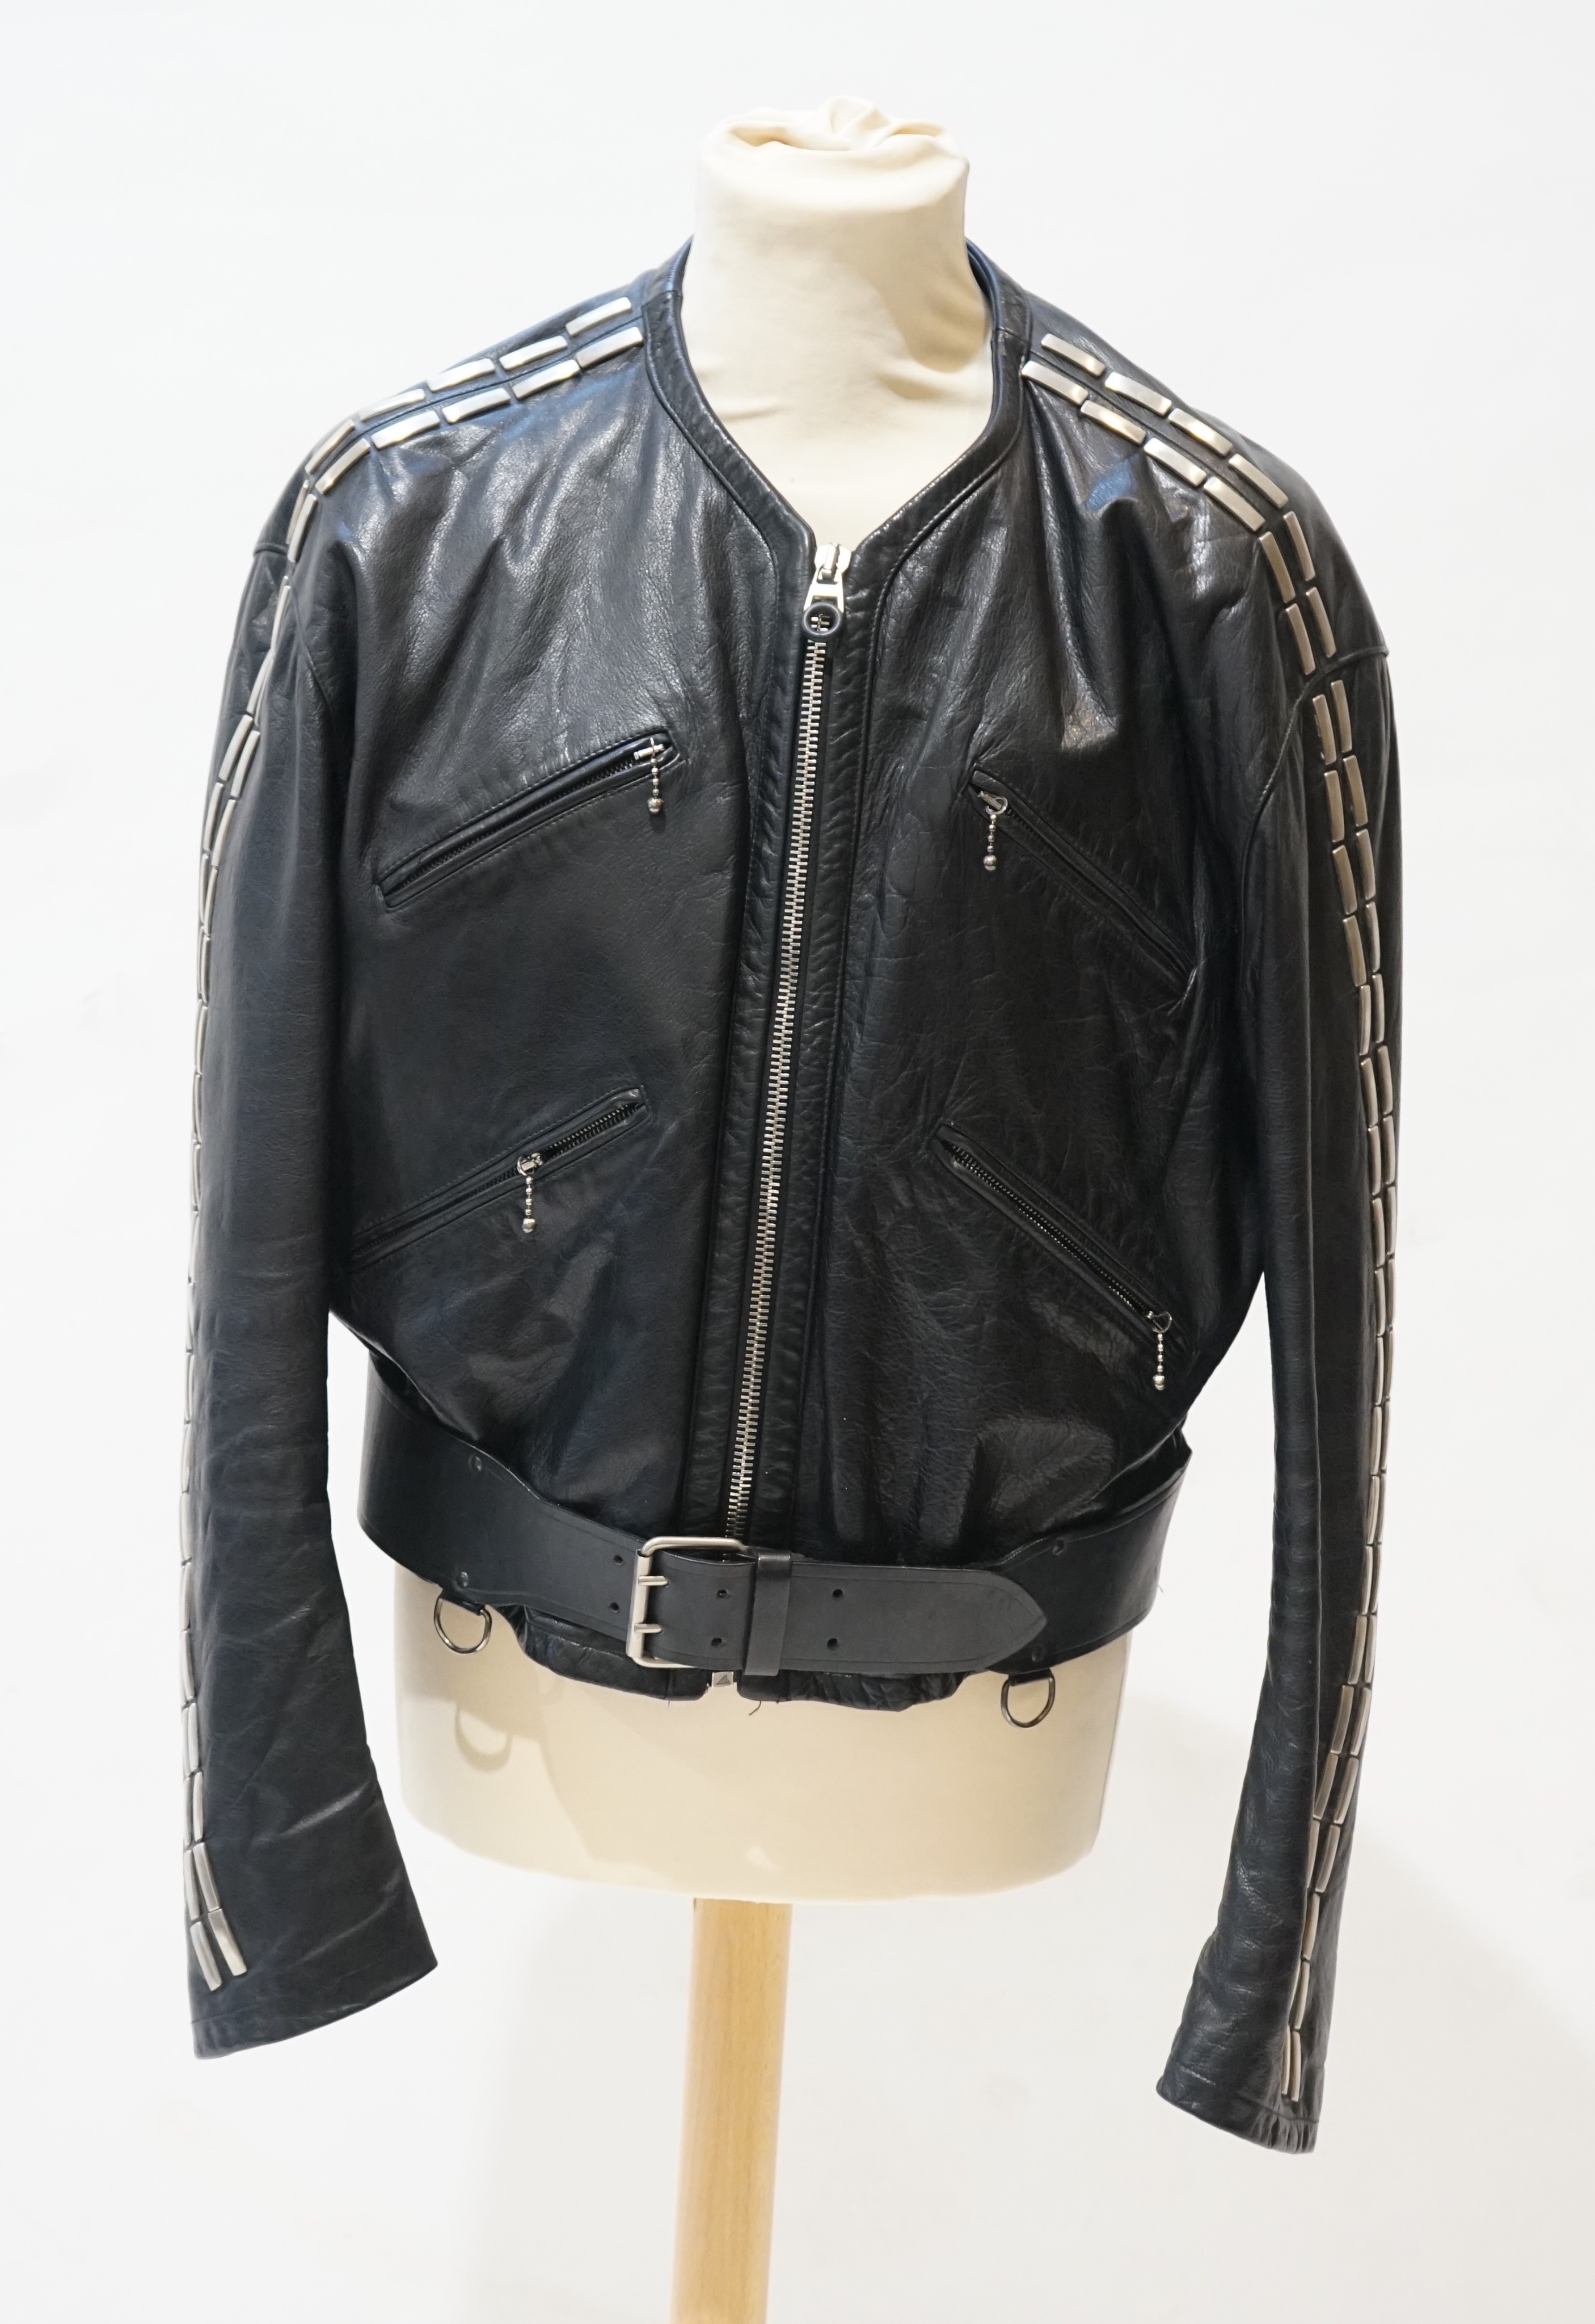 A gentleman's Calugi e Giannelli black leather jacket with metal appliques to the sleeves, size 52 (UK 48)